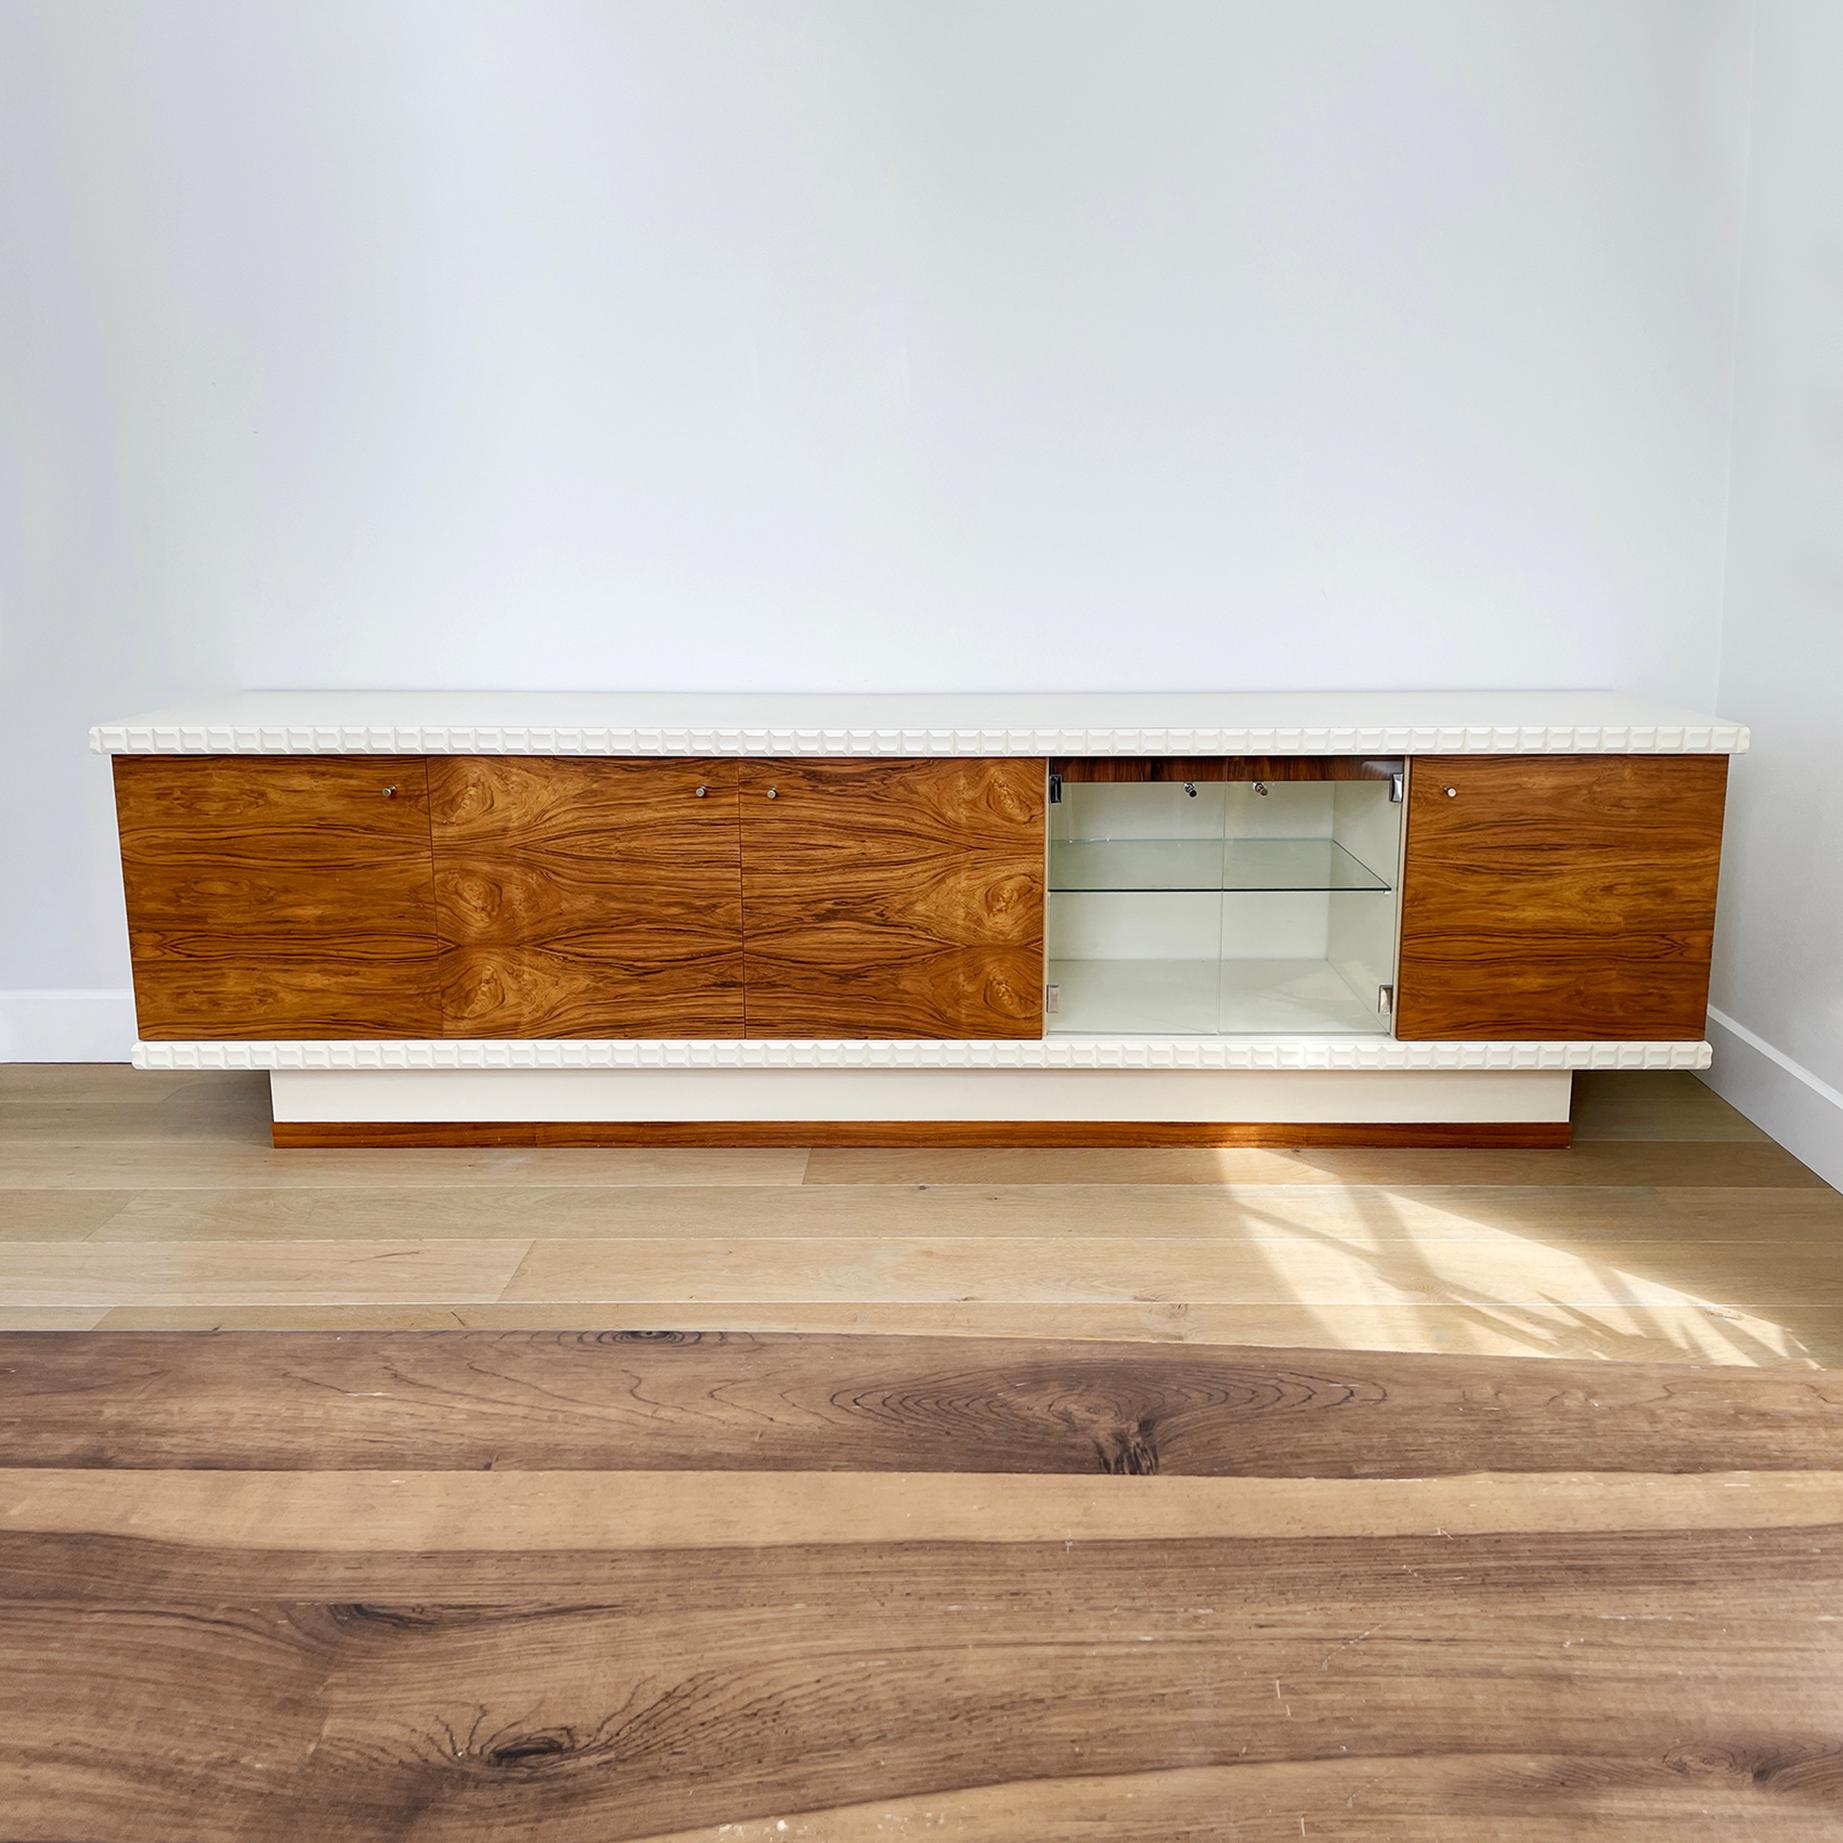 An impressive West German sideboard with a white powder-coated frame and Brazilian rosewood or Rio Palisander veneered doors and accents, which accommodates a small drinks serving station. This long sideboard sits on a pedestal, with the rosewood